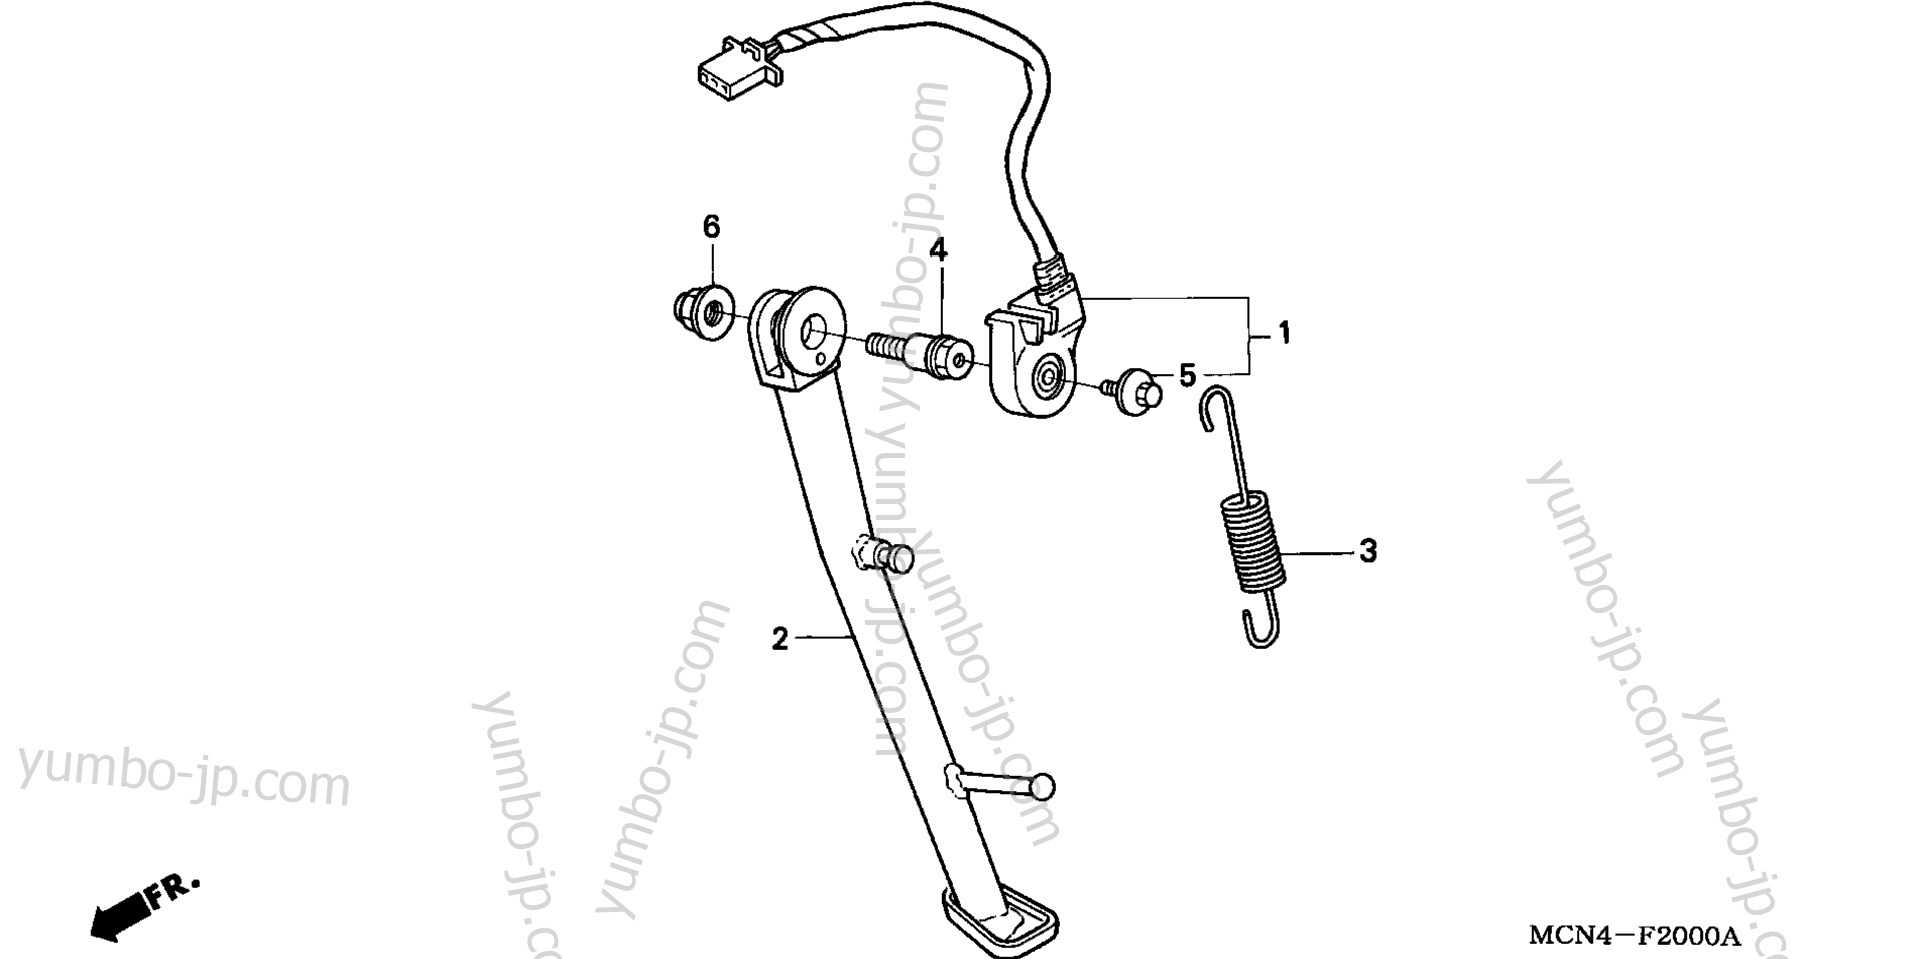 SIDE STAND for motorcycles HONDA CB750 A 2003 year